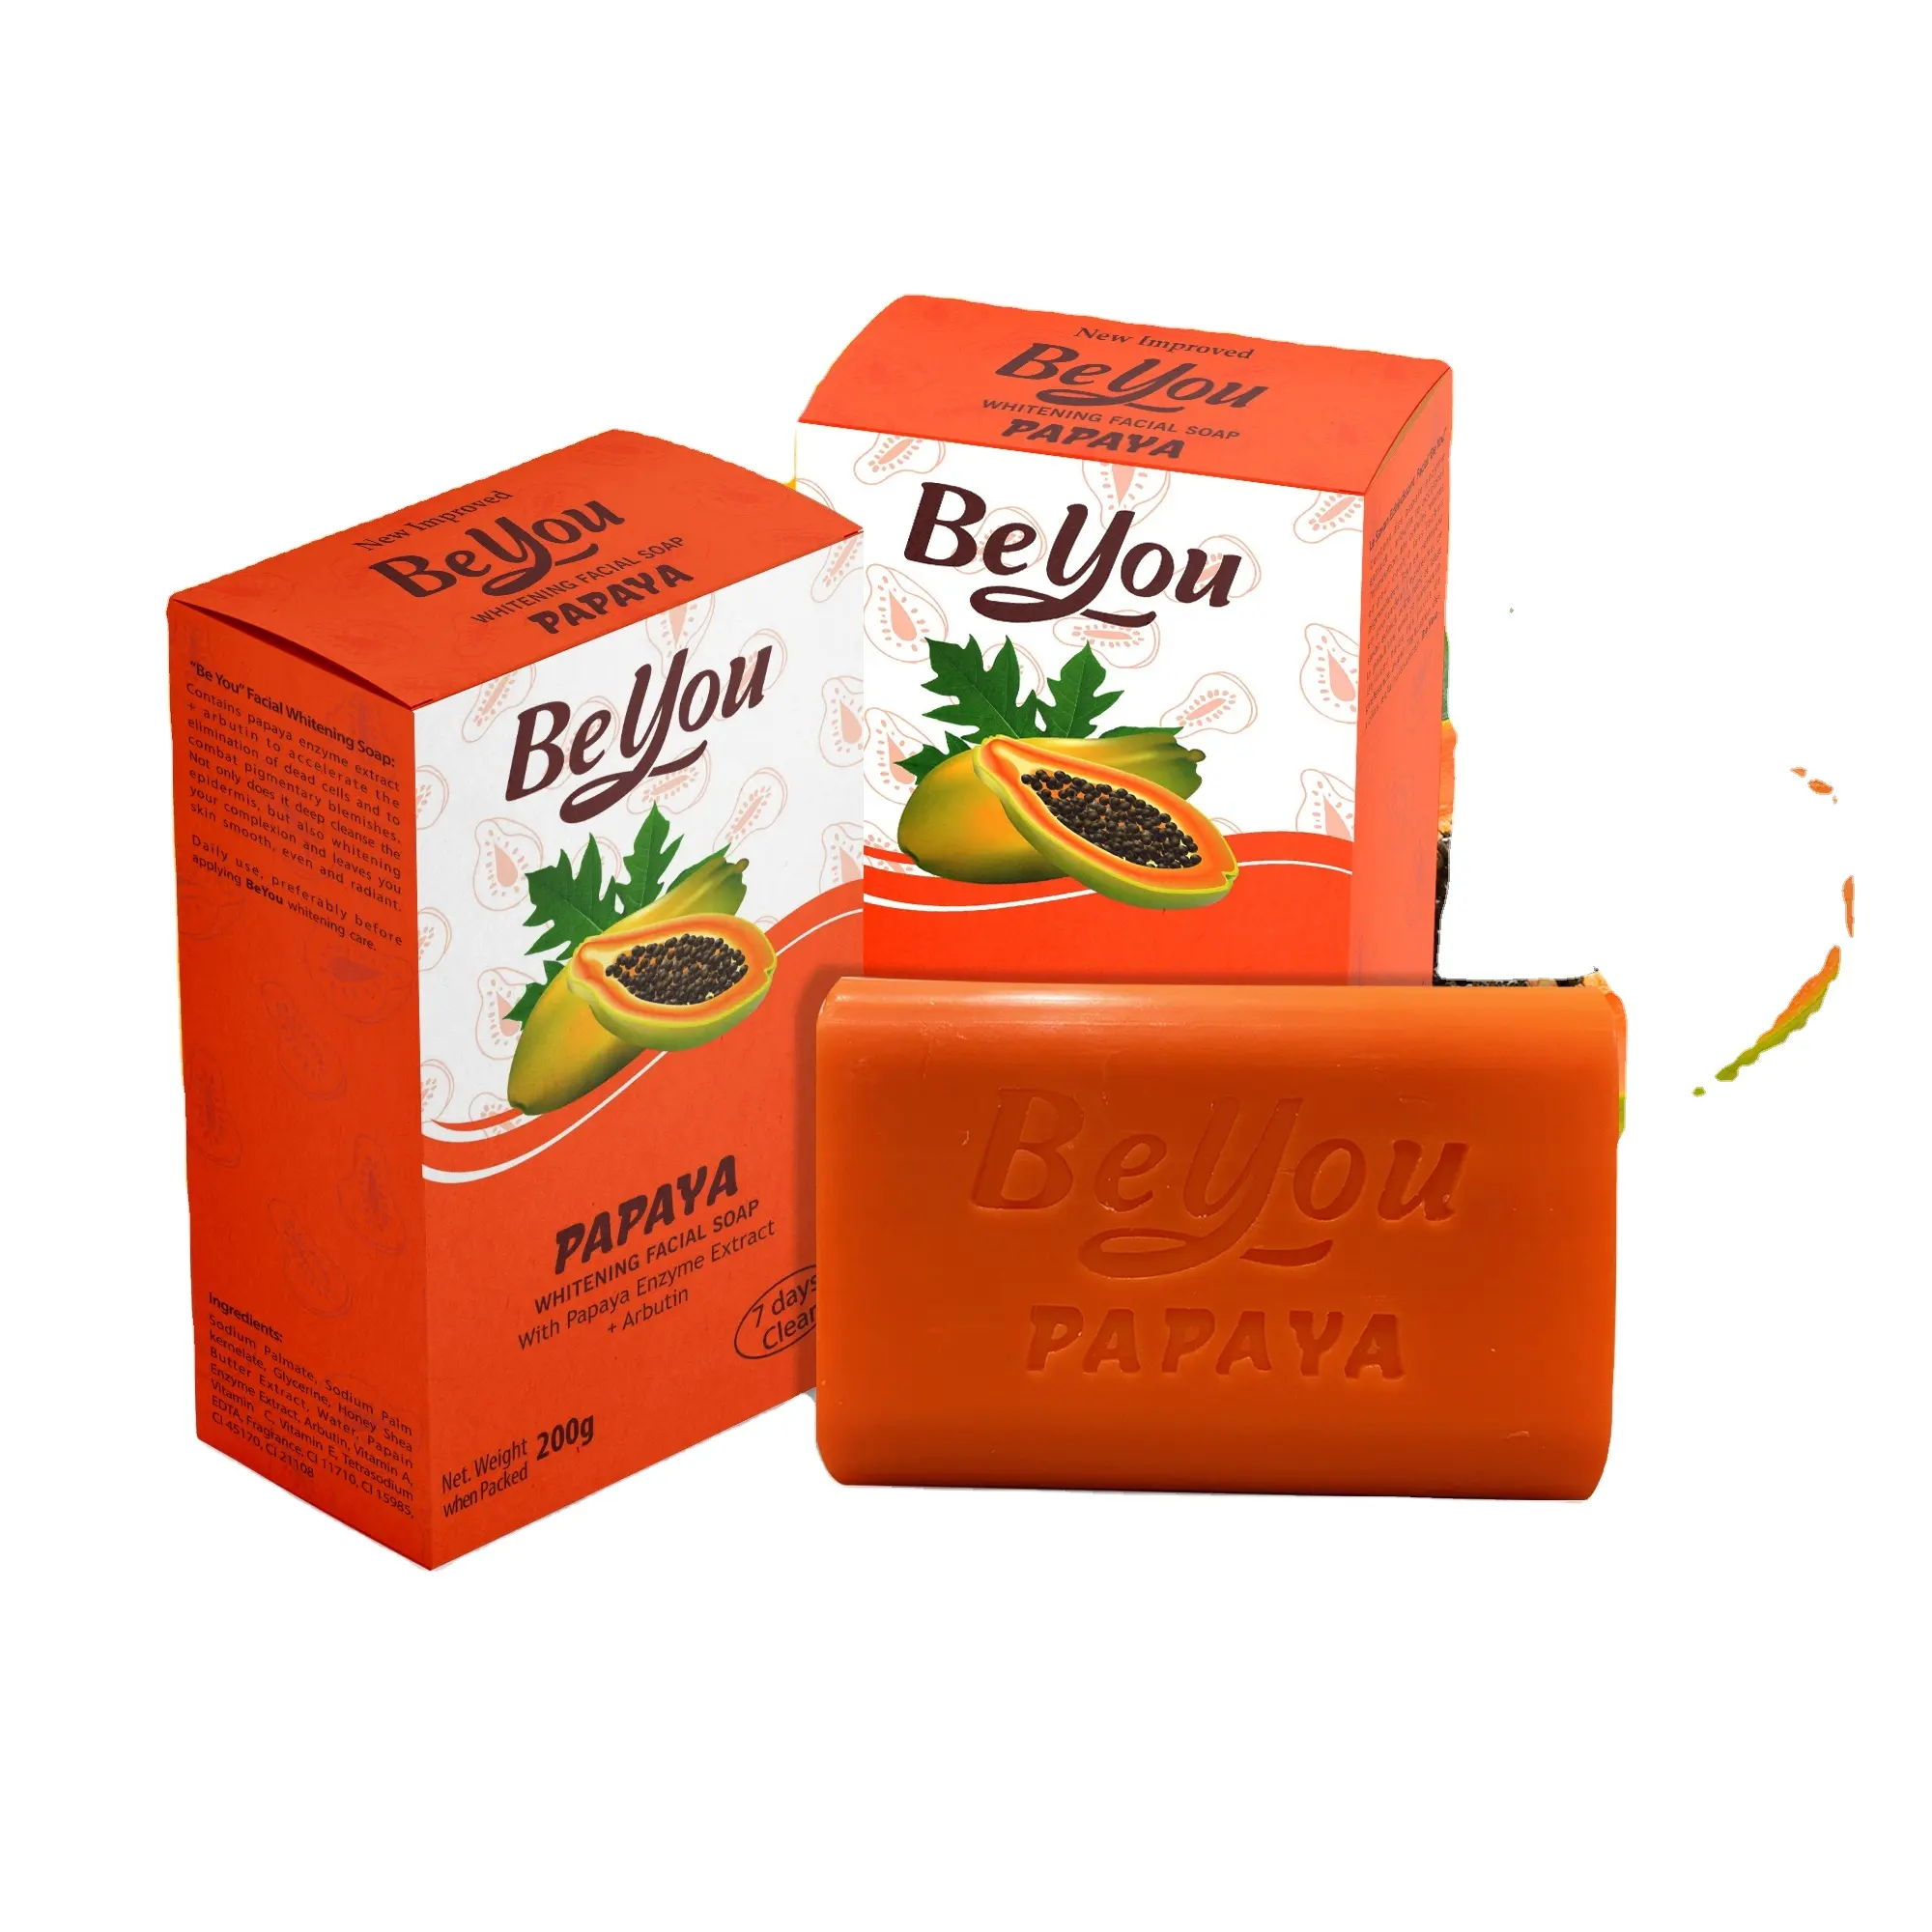 Wholesale High Quality Beauty soap BeYou Beauty Soap Papaya for Adults Age group | Bath Soap for family or hotel with palm oil